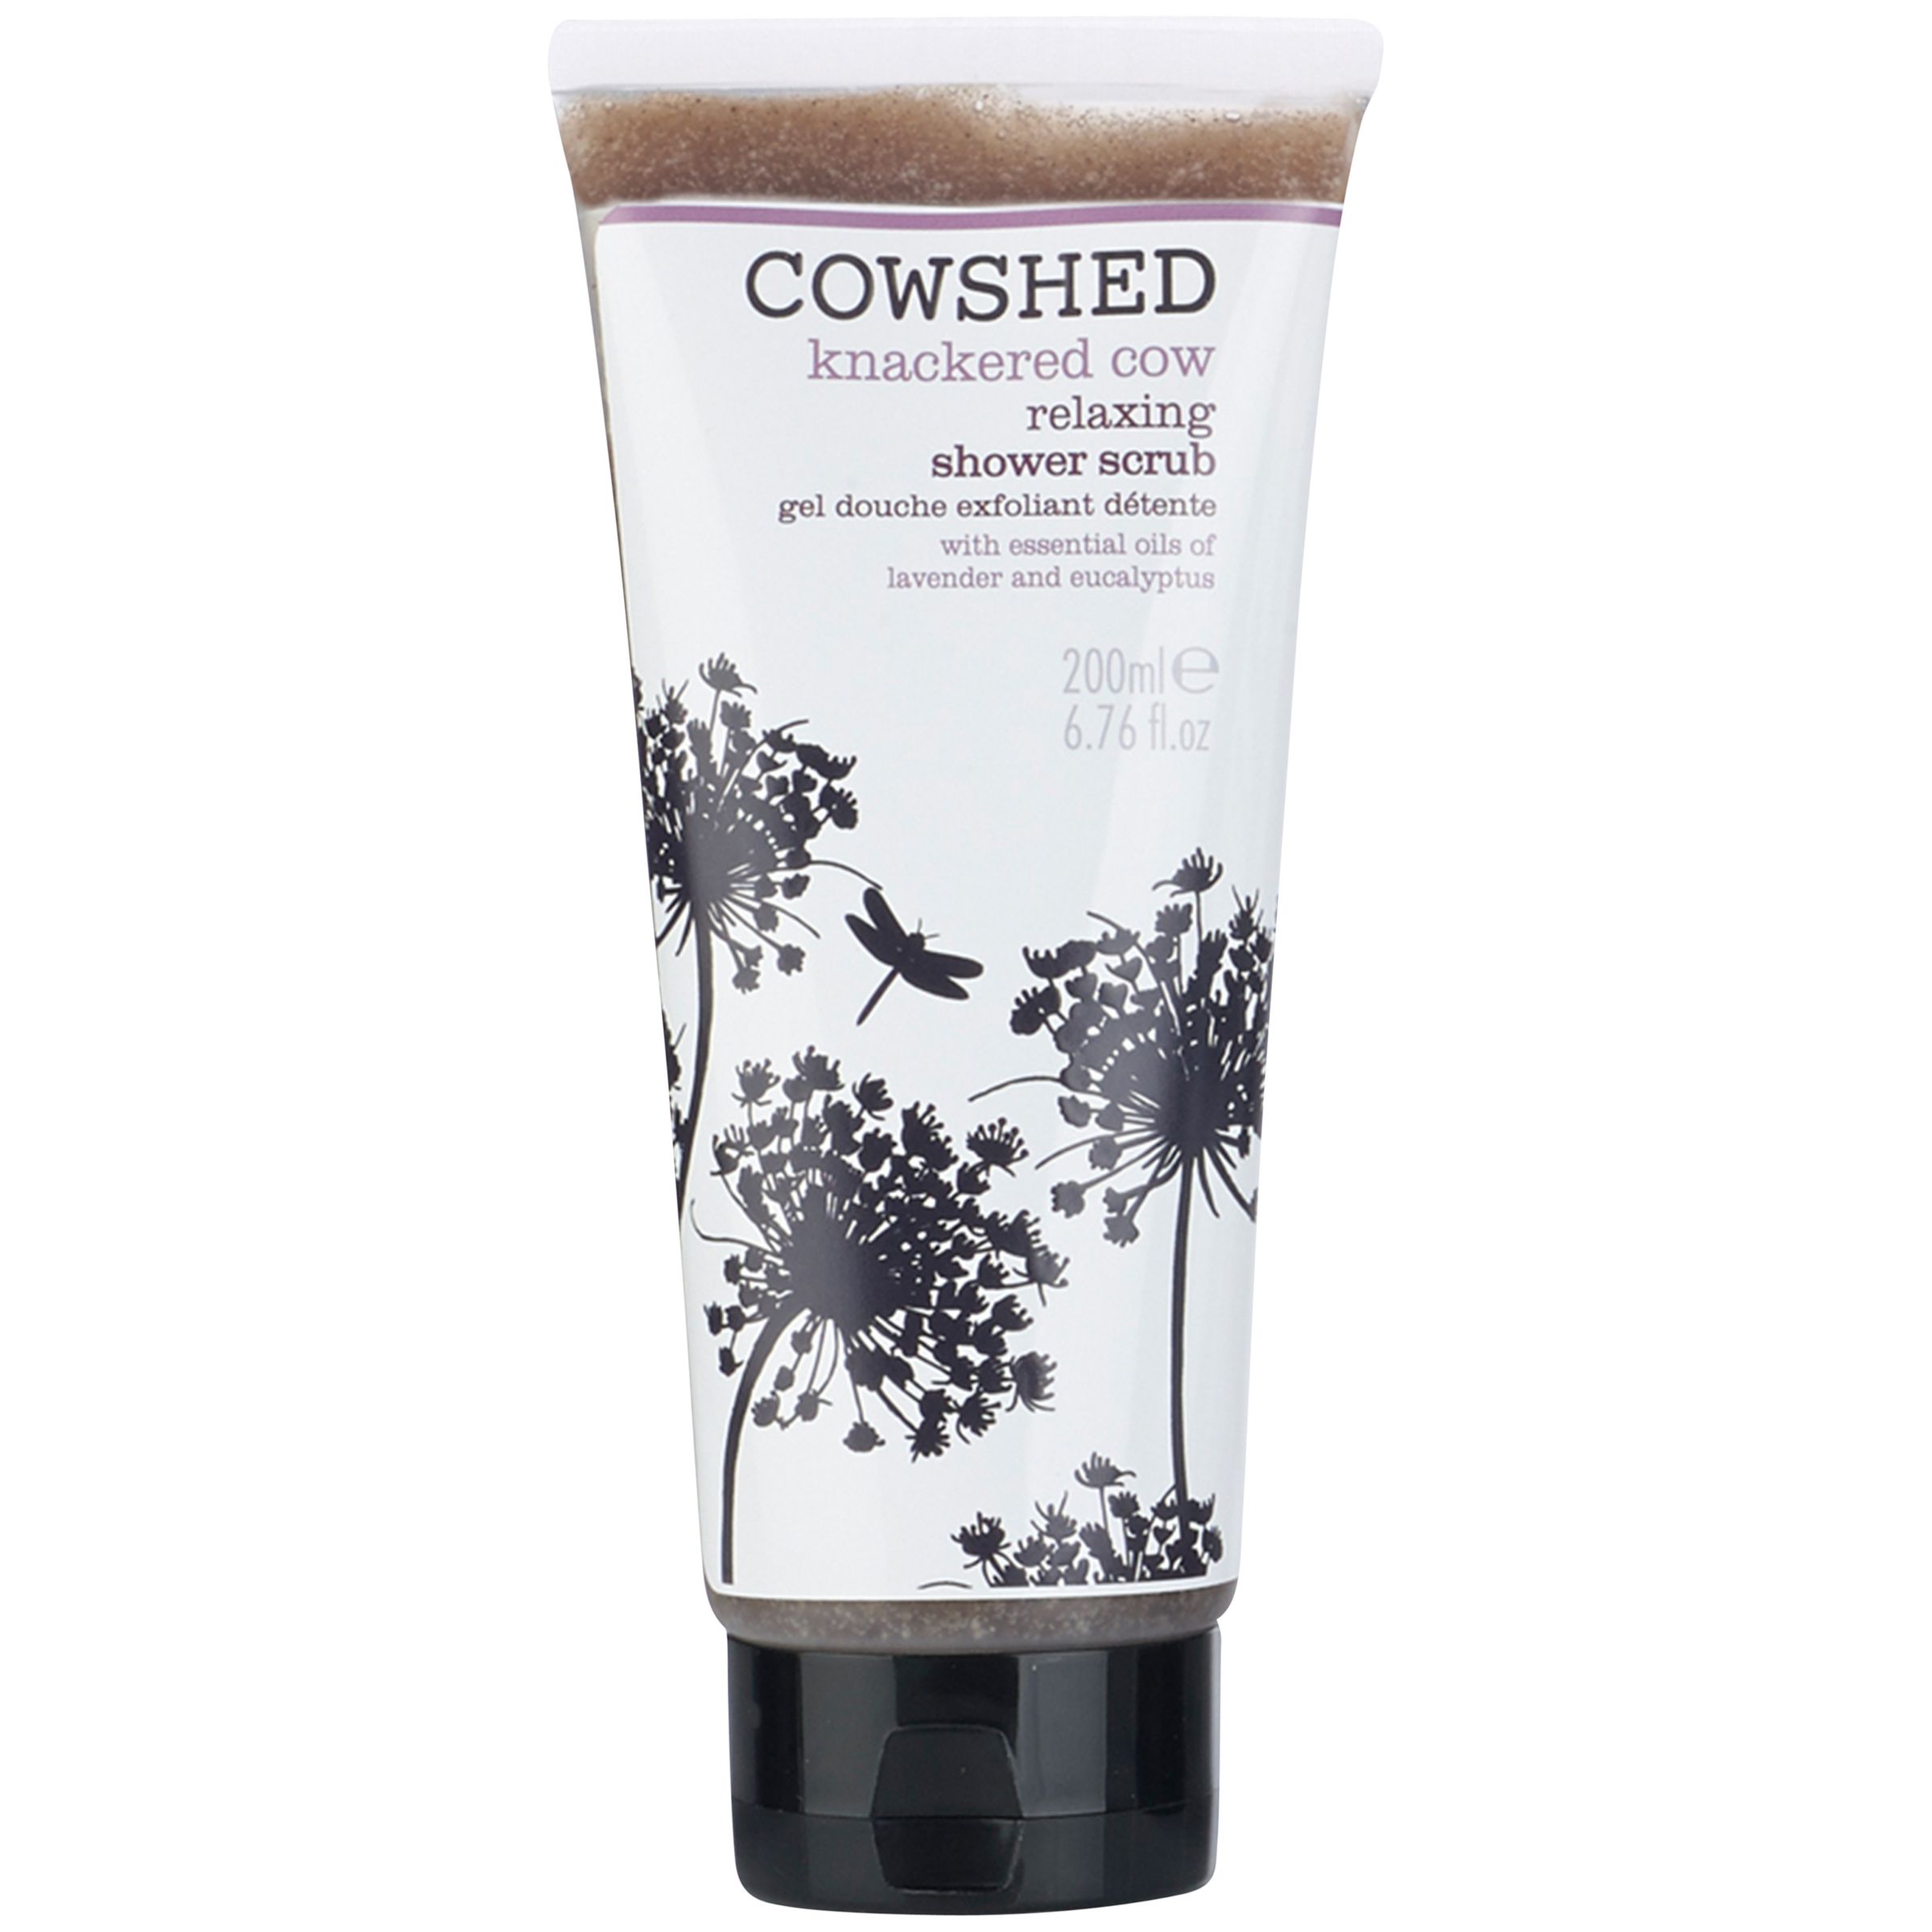 Cowshed Knackered Cow Relaxing Scrub, 200ml